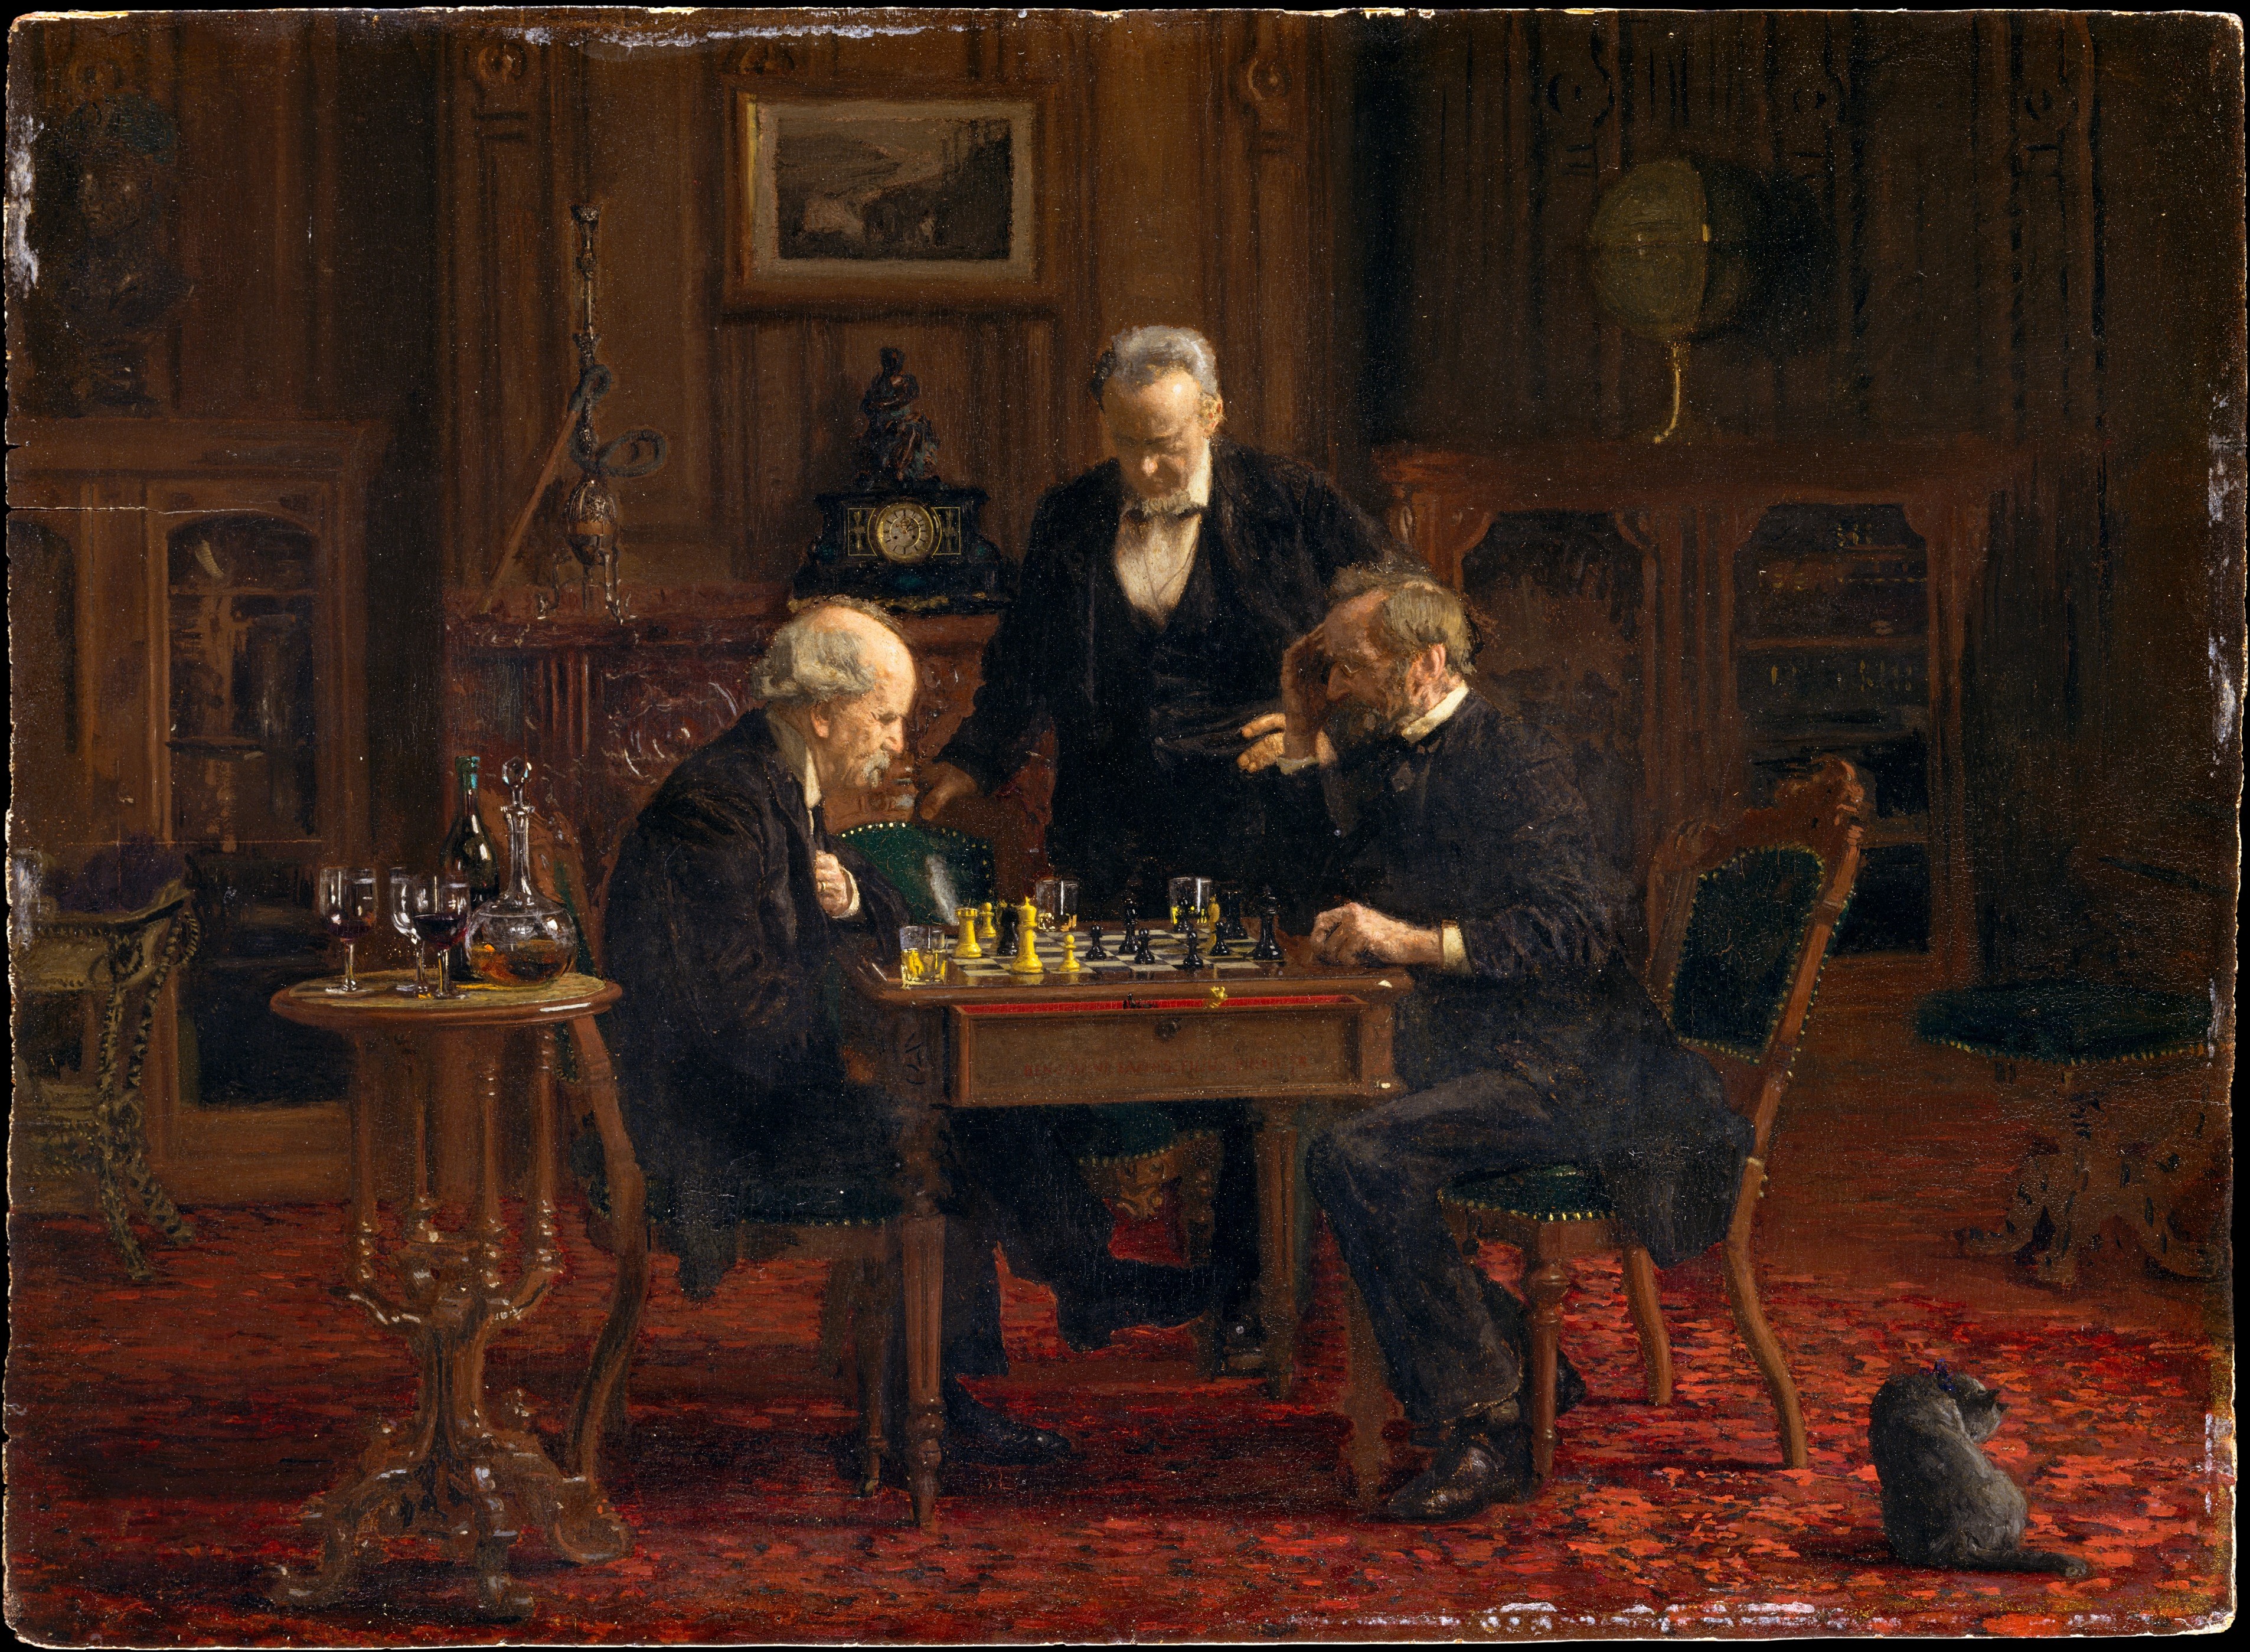 0407_Thomas Cowperthwait Eakins_The Chess Players 썸네일